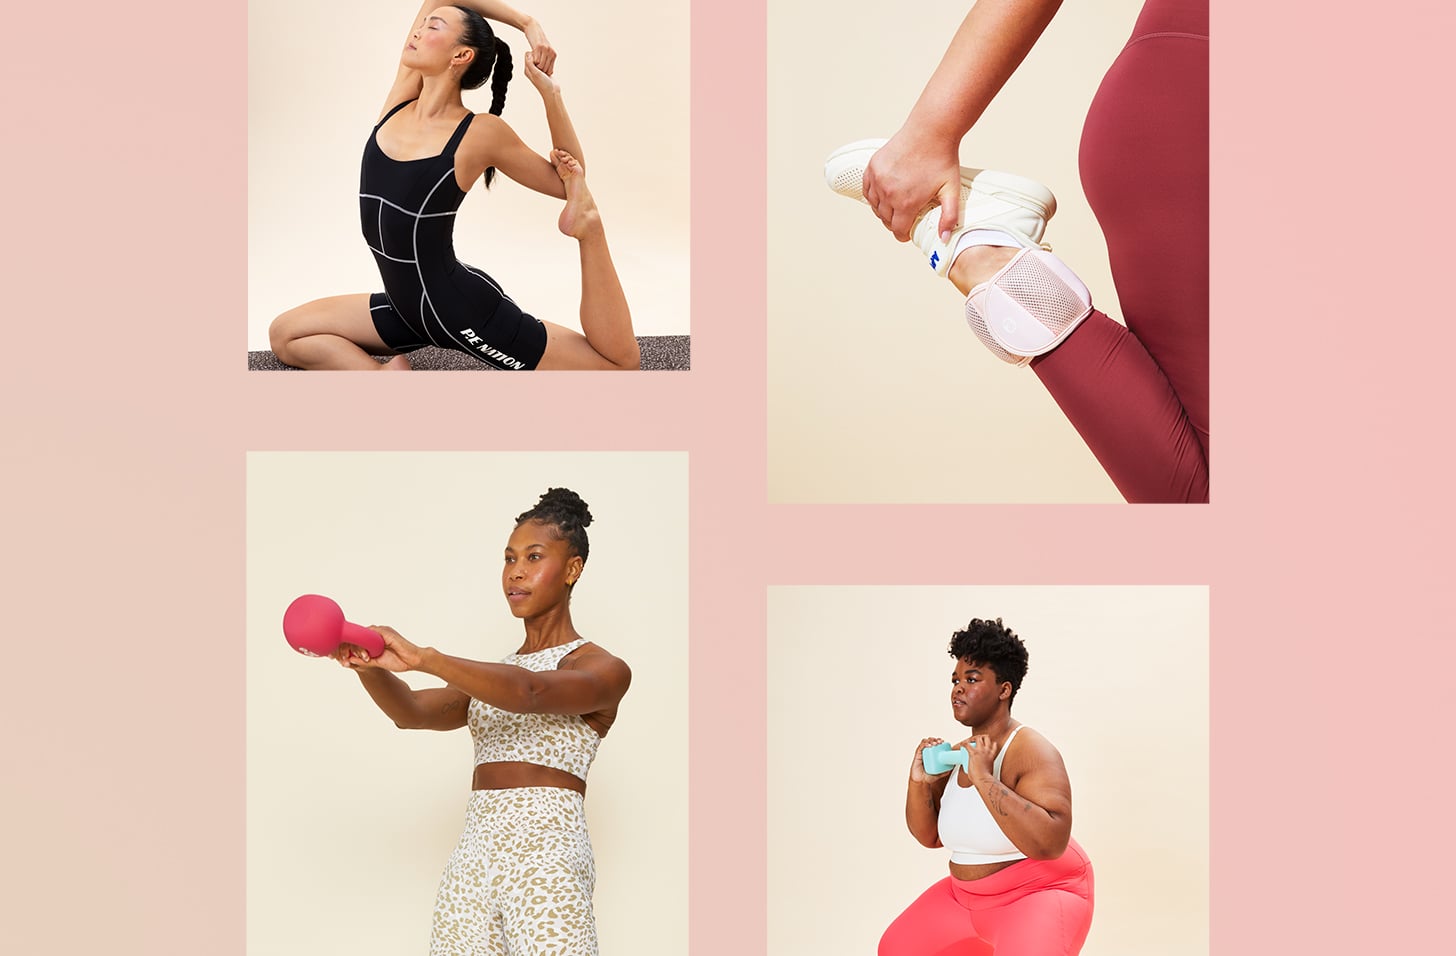 5 Deals On Workout Fitness Gadgets To Lose Weight And Tone Up